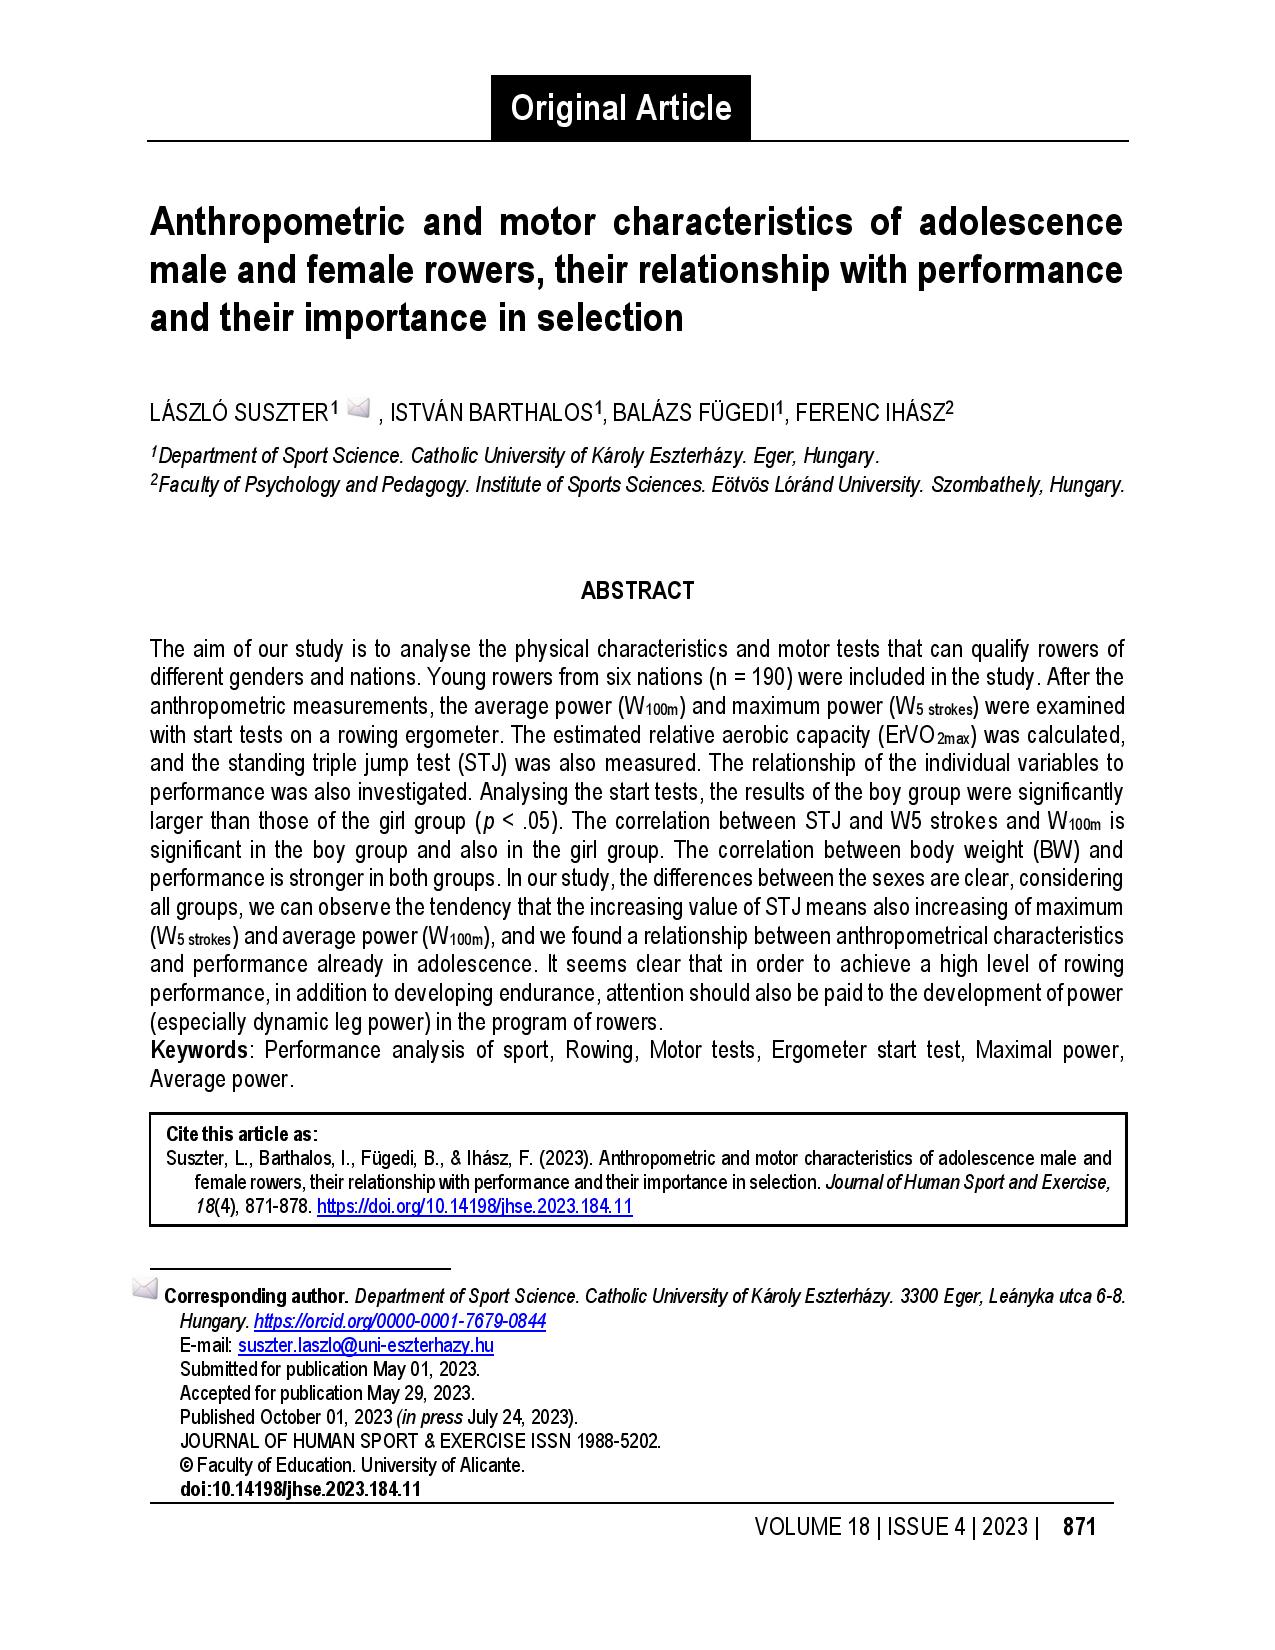 Anthropometric and motor characteristics of adolescence male and female rowers, their relationship with performance and their importance in selection